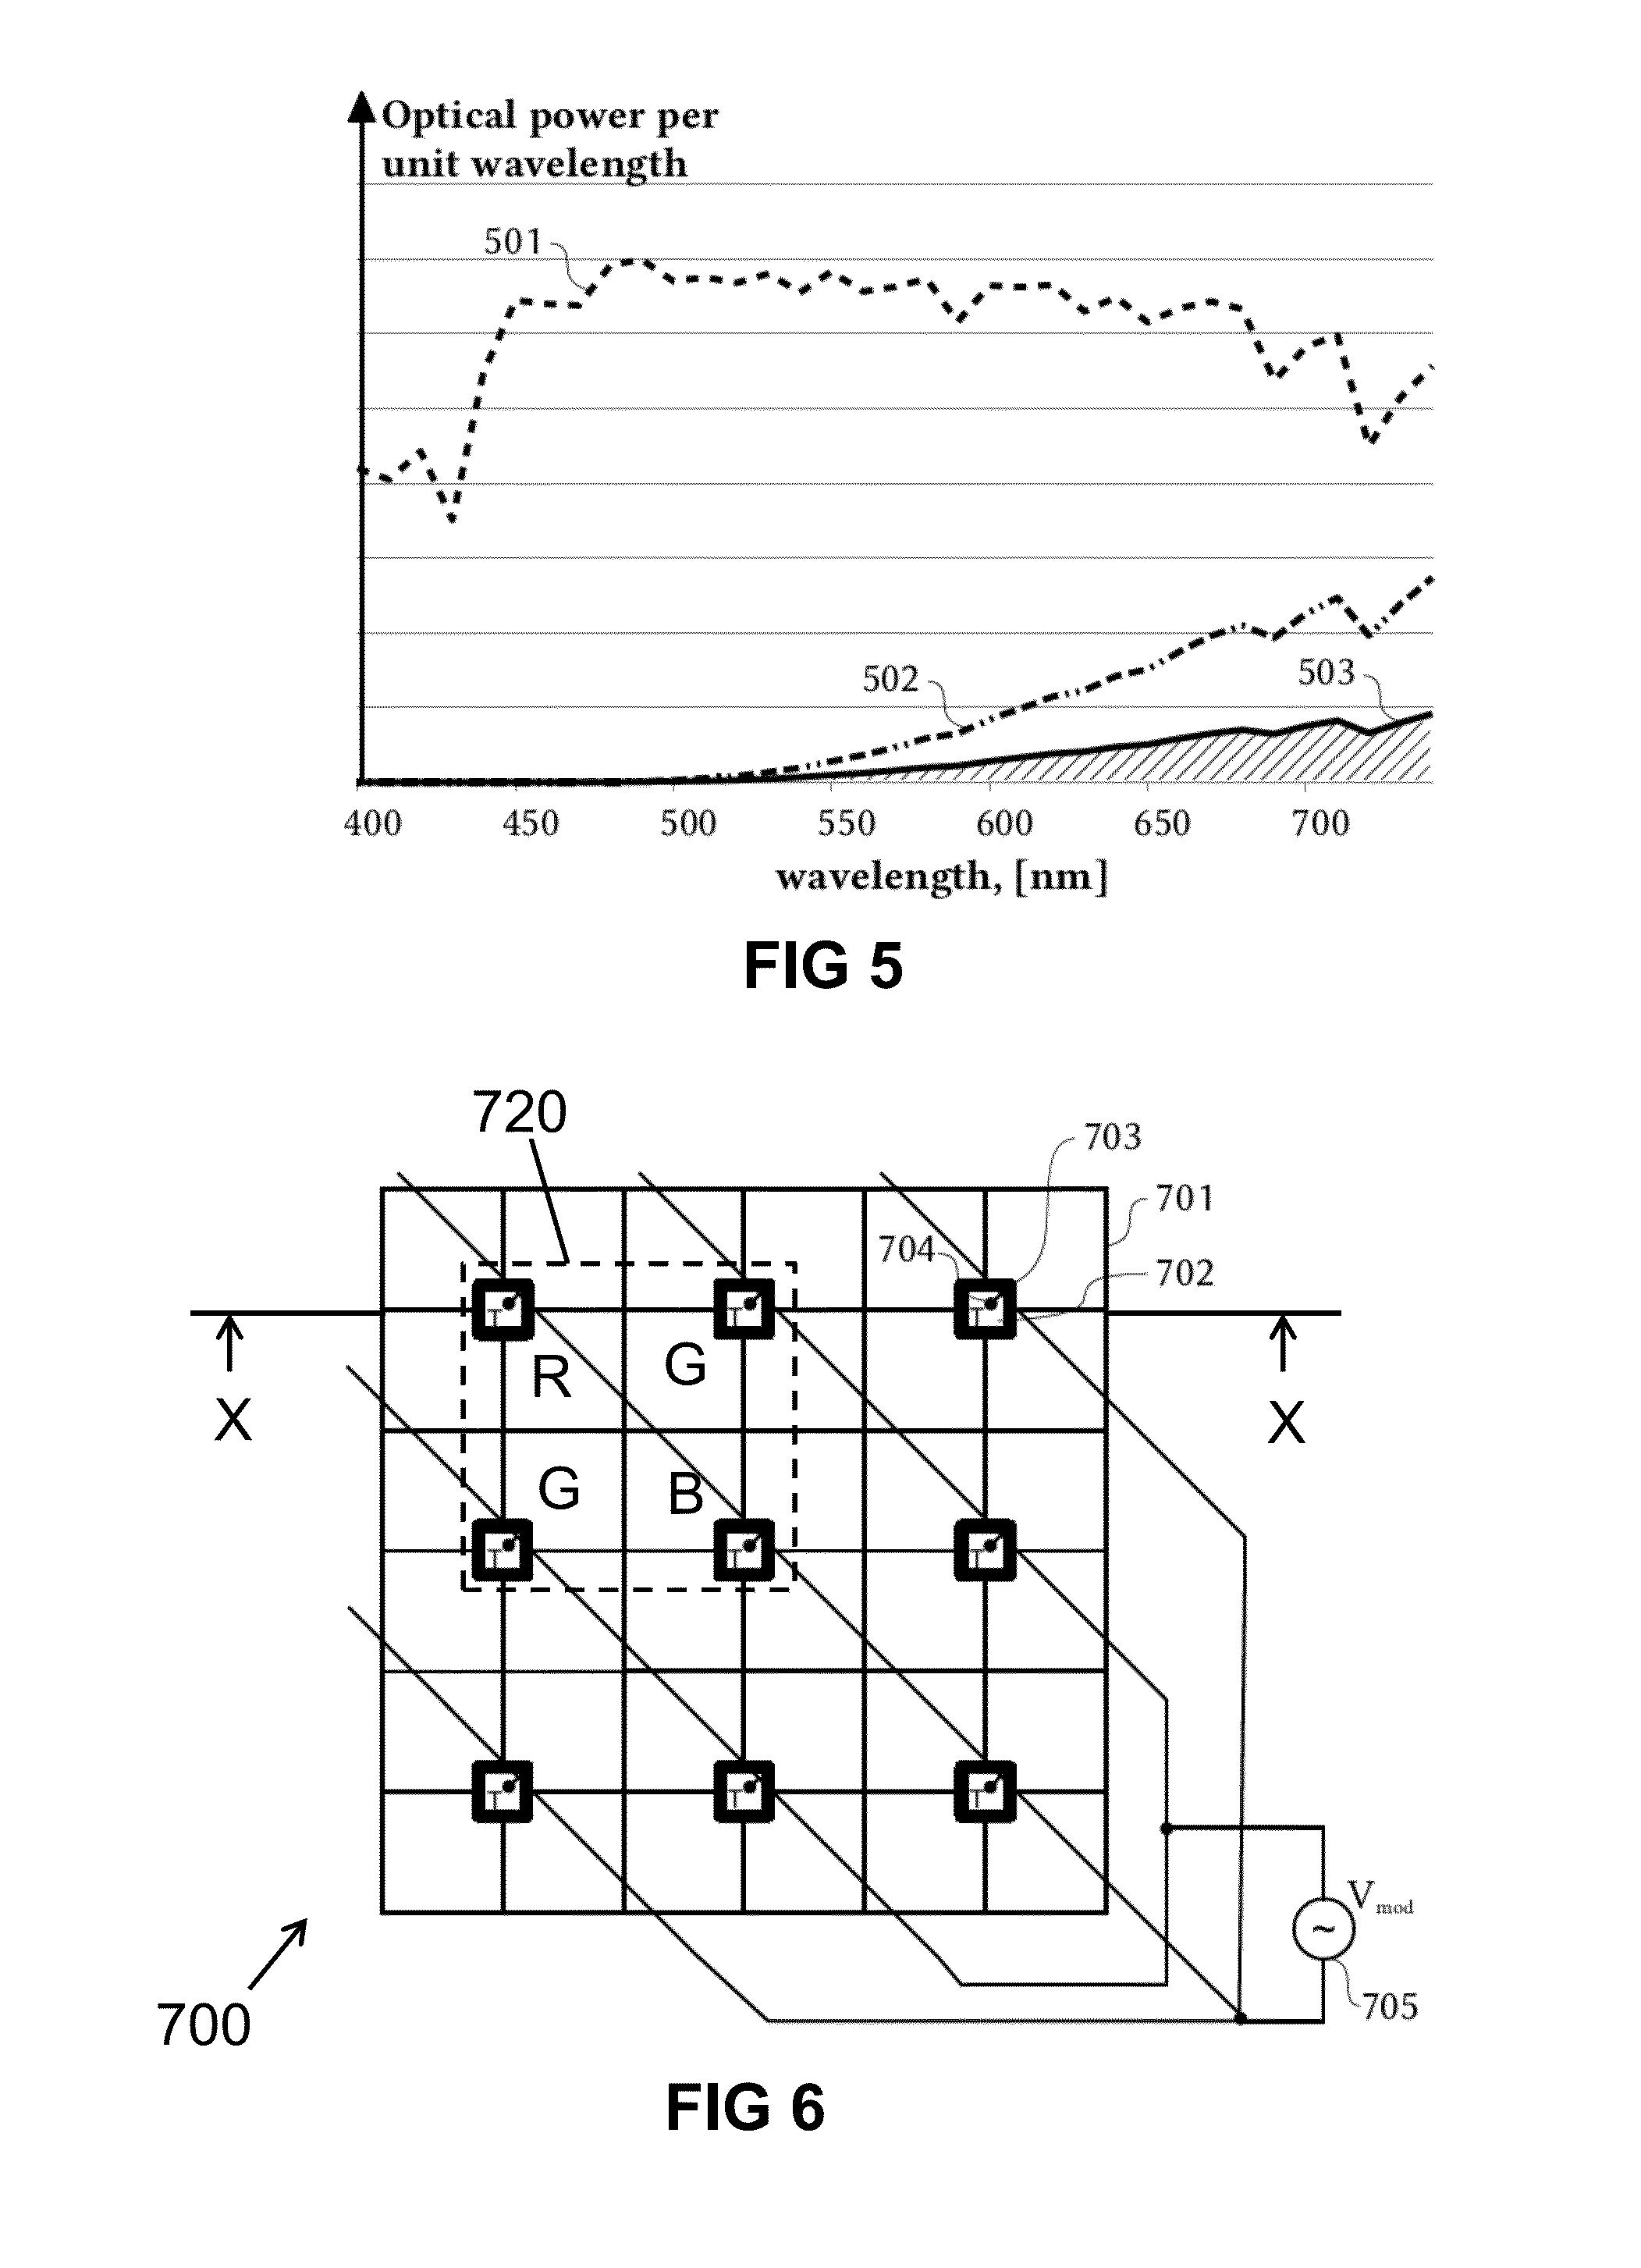 Semiconductor pixel unit for sensing near-infrared light, optionally simultaneously with visible light, and a semiconductor sensor comprising same